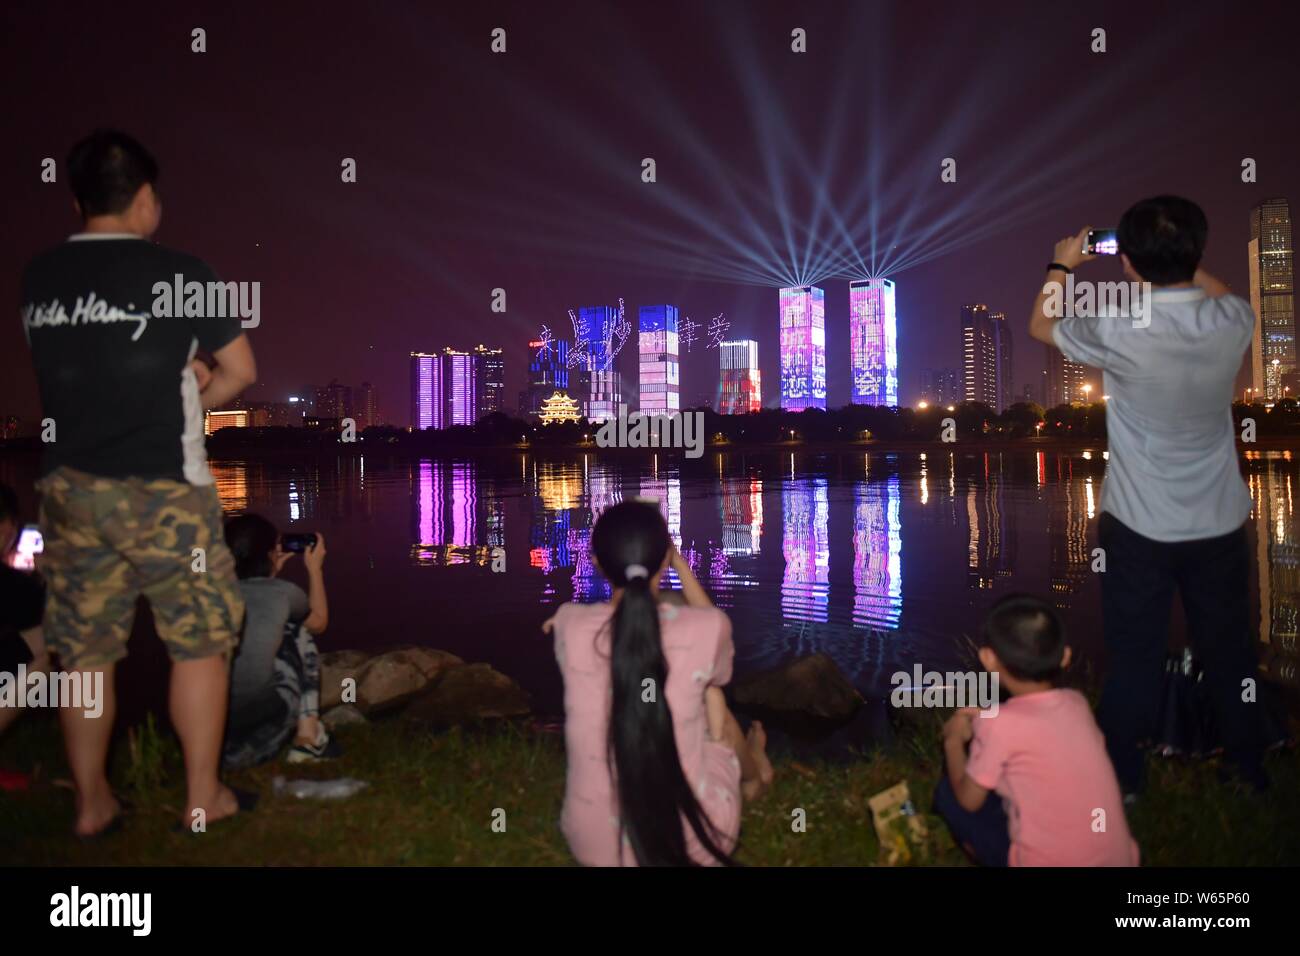 Local residents watch 777 drones or UAVs (unmanned aerial vehicles) forming patterns and words that represent 'love' to light up the sky as part of ce Stock Photo